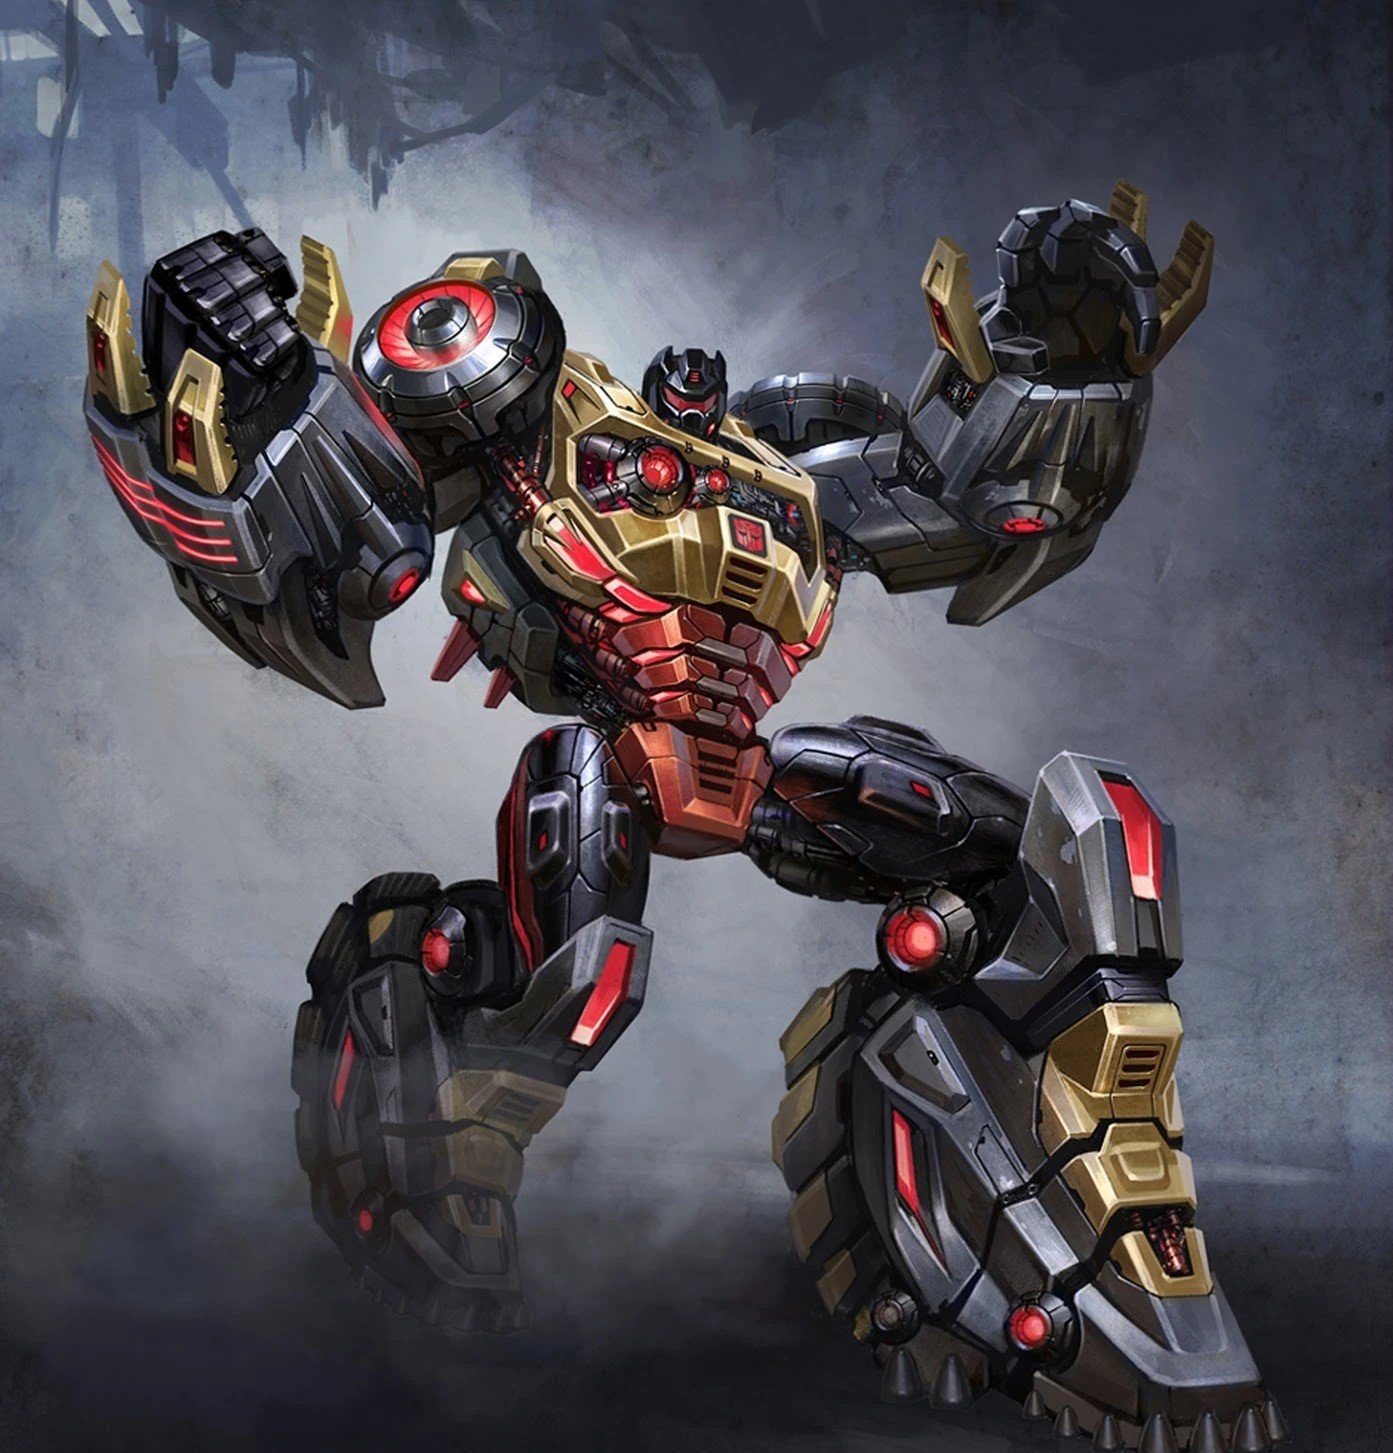 11-facts-about-grimlock-transformers